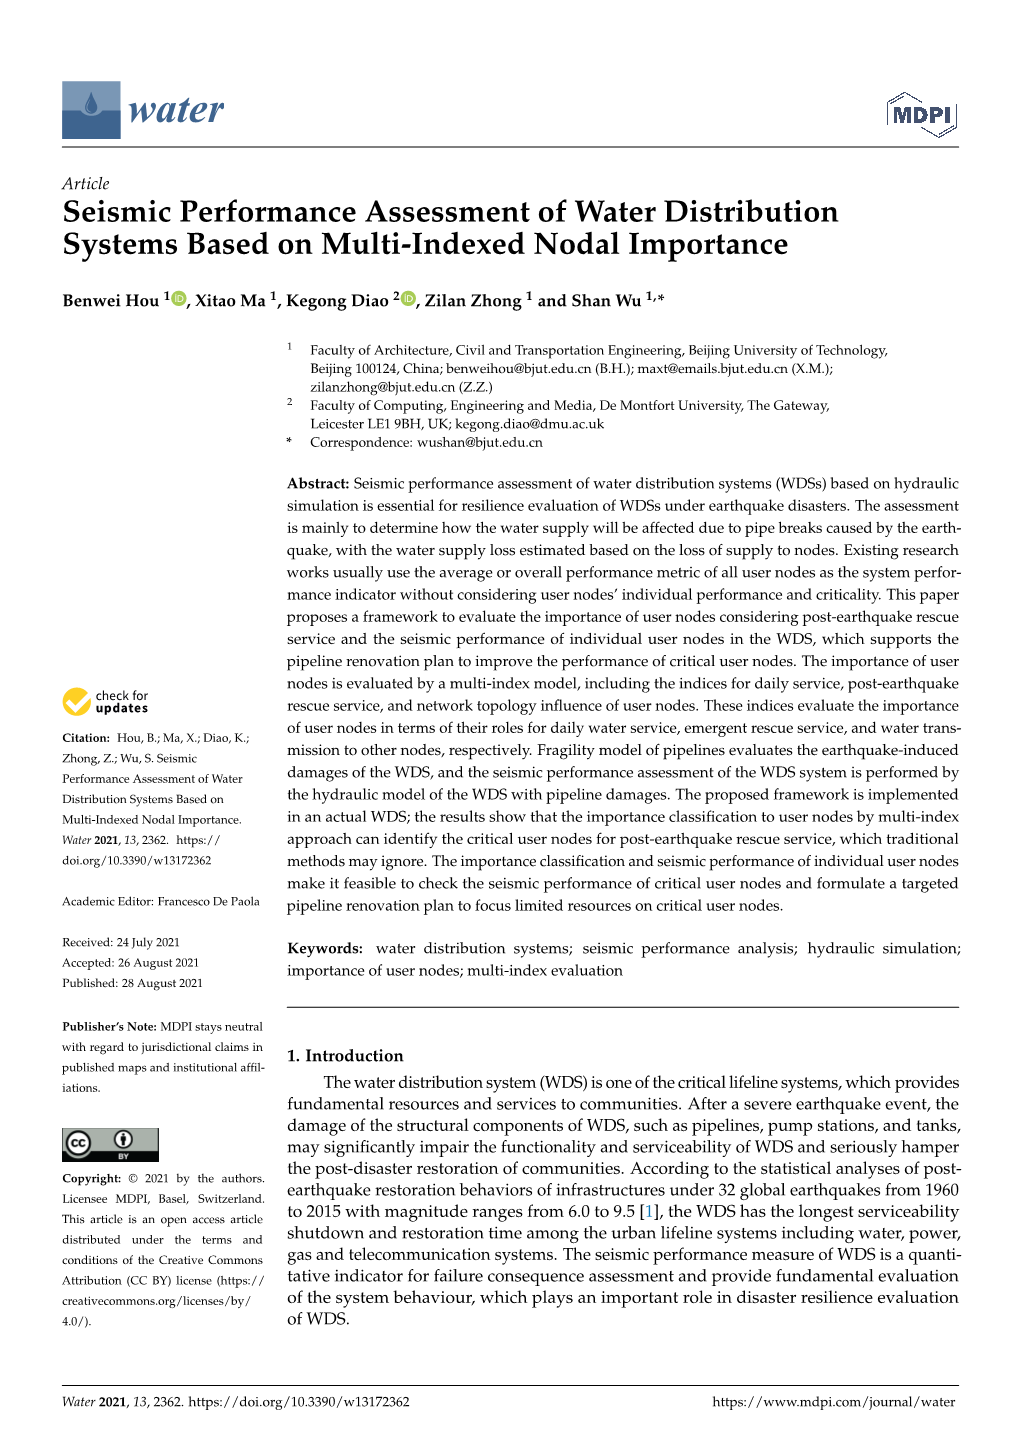 Seismic Performance Assessment of Water Distribution Systems Based on Multi-Indexed Nodal Importance